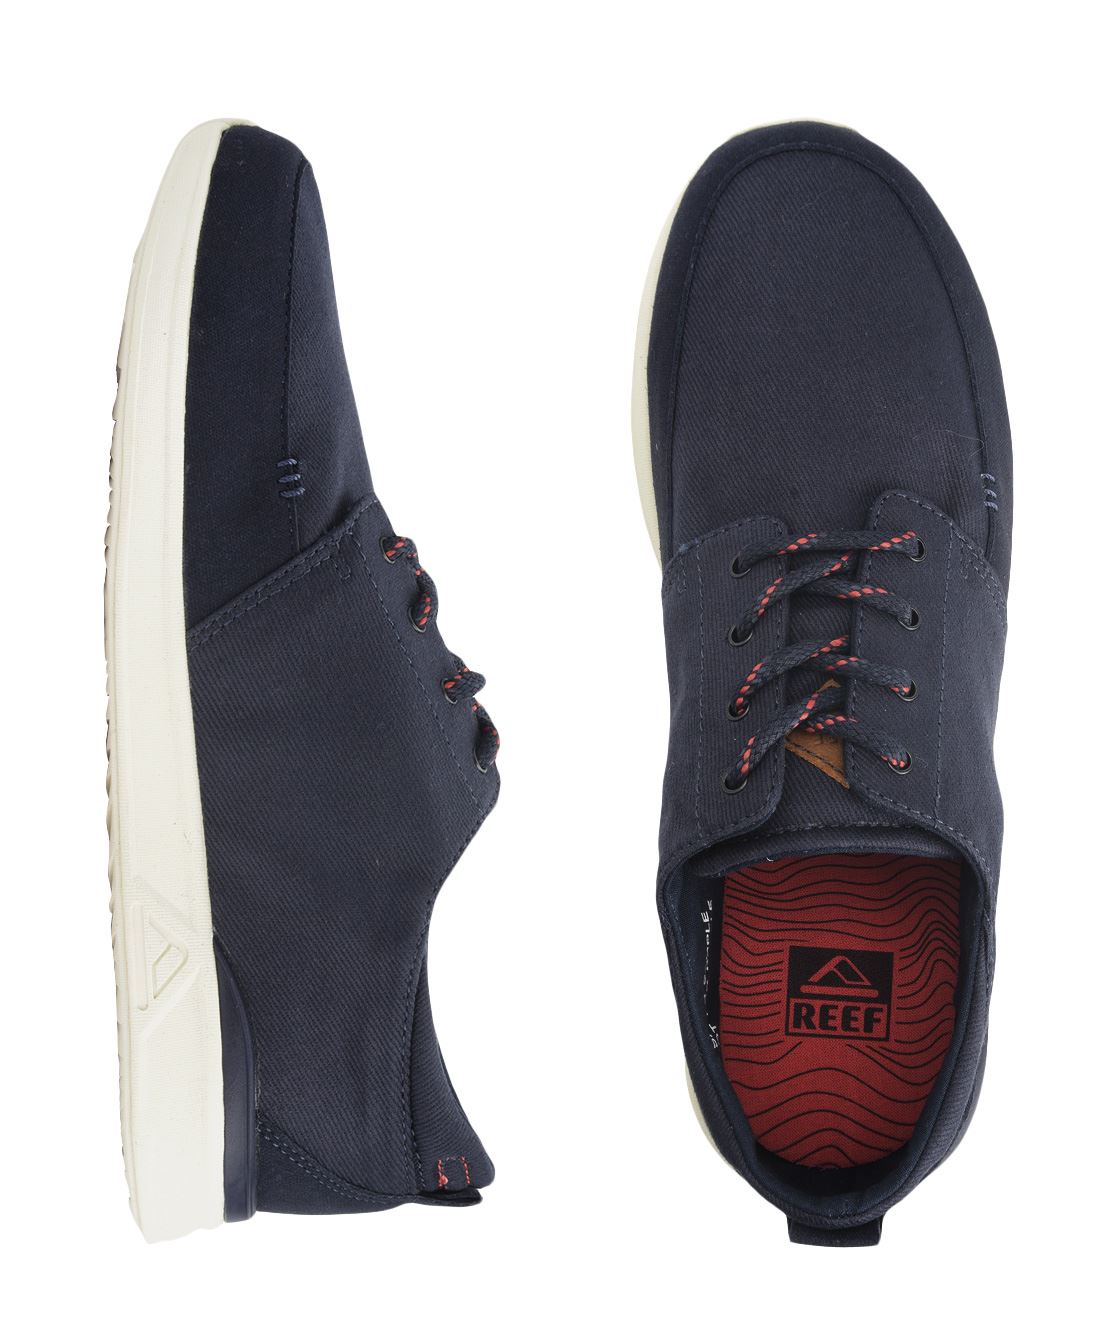 Reef Rover Low Trainers Navy UK 7-10